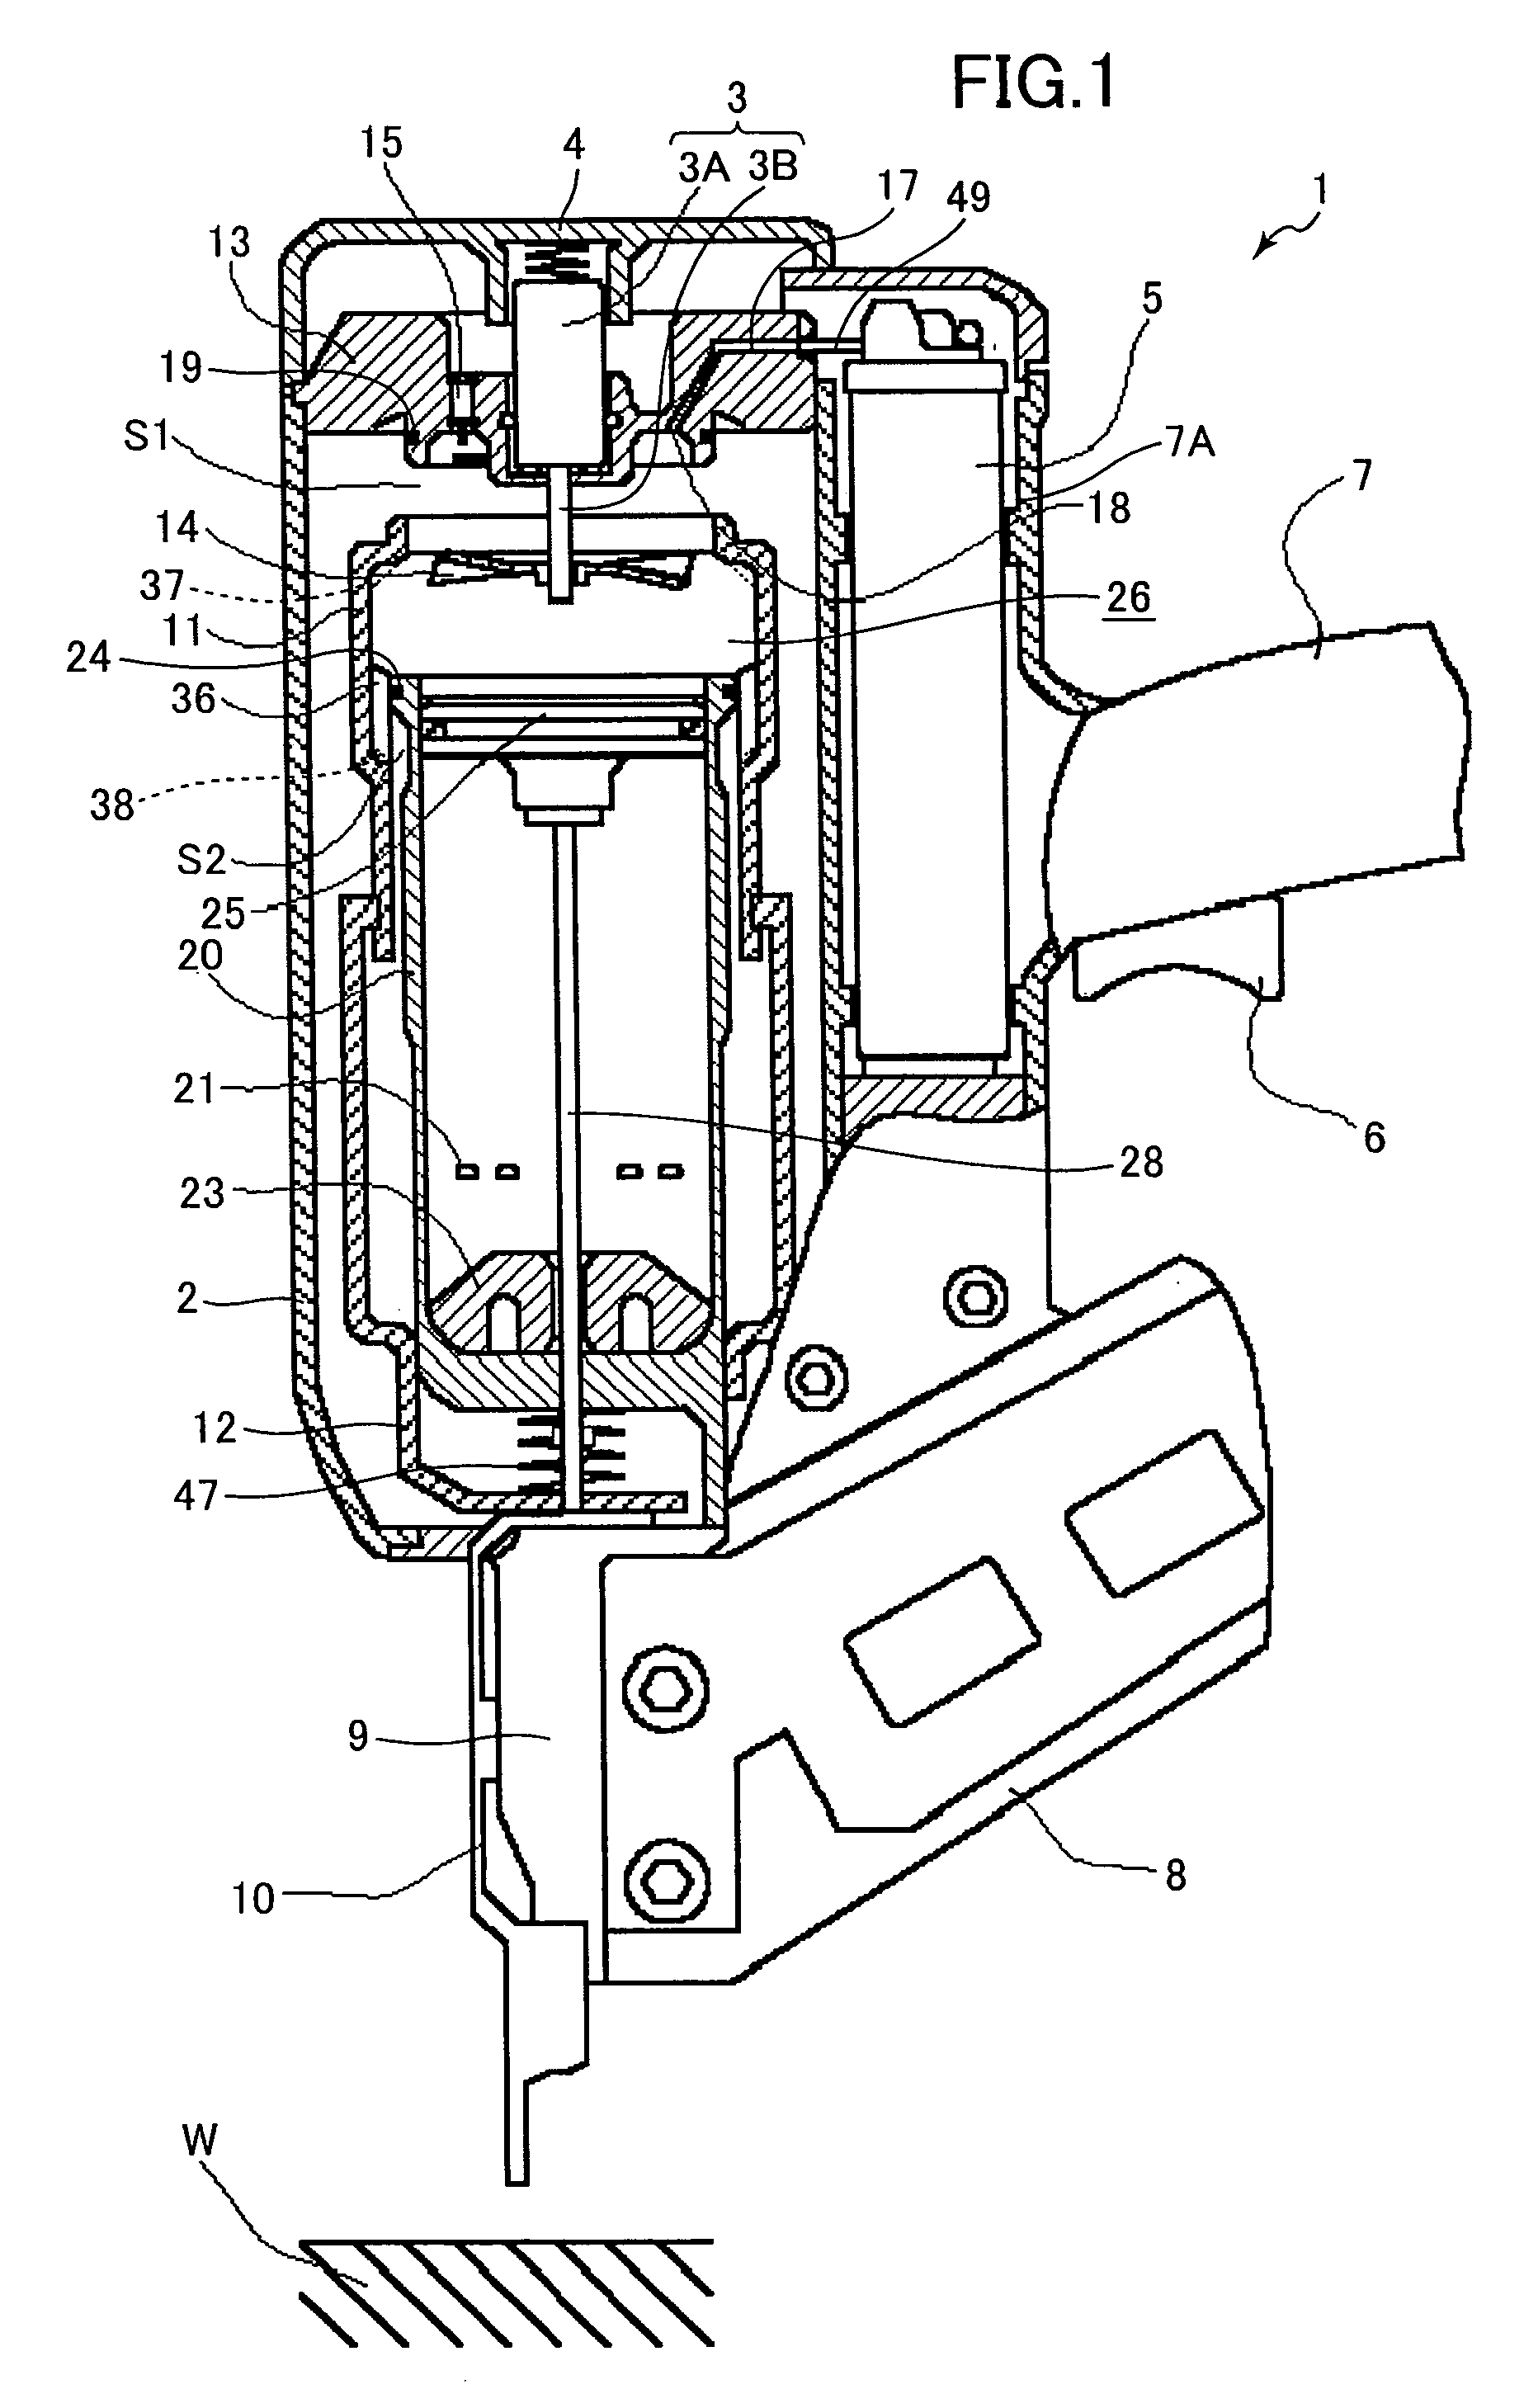 Combustion type power tool having fin in low turbulent combustion region within combustion chamber